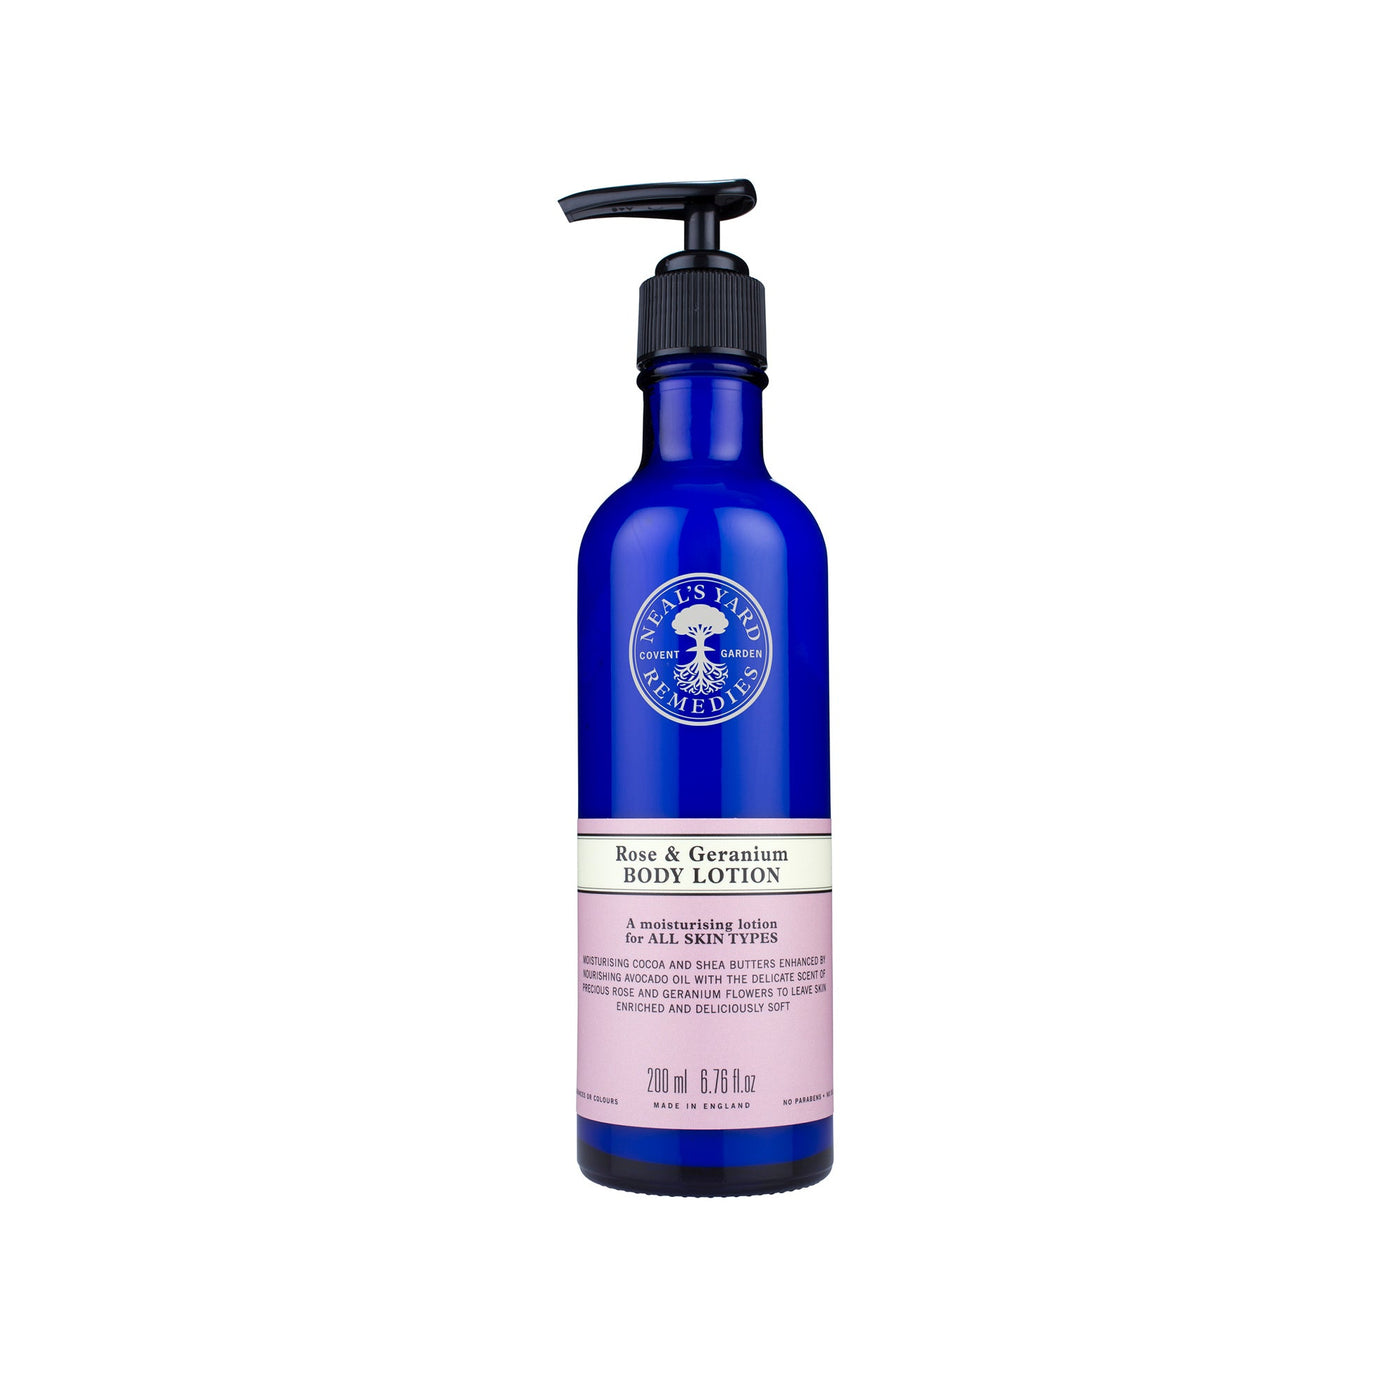 rose-and-geranium-body-lotion-front-0672-high-res-2000px.jpg